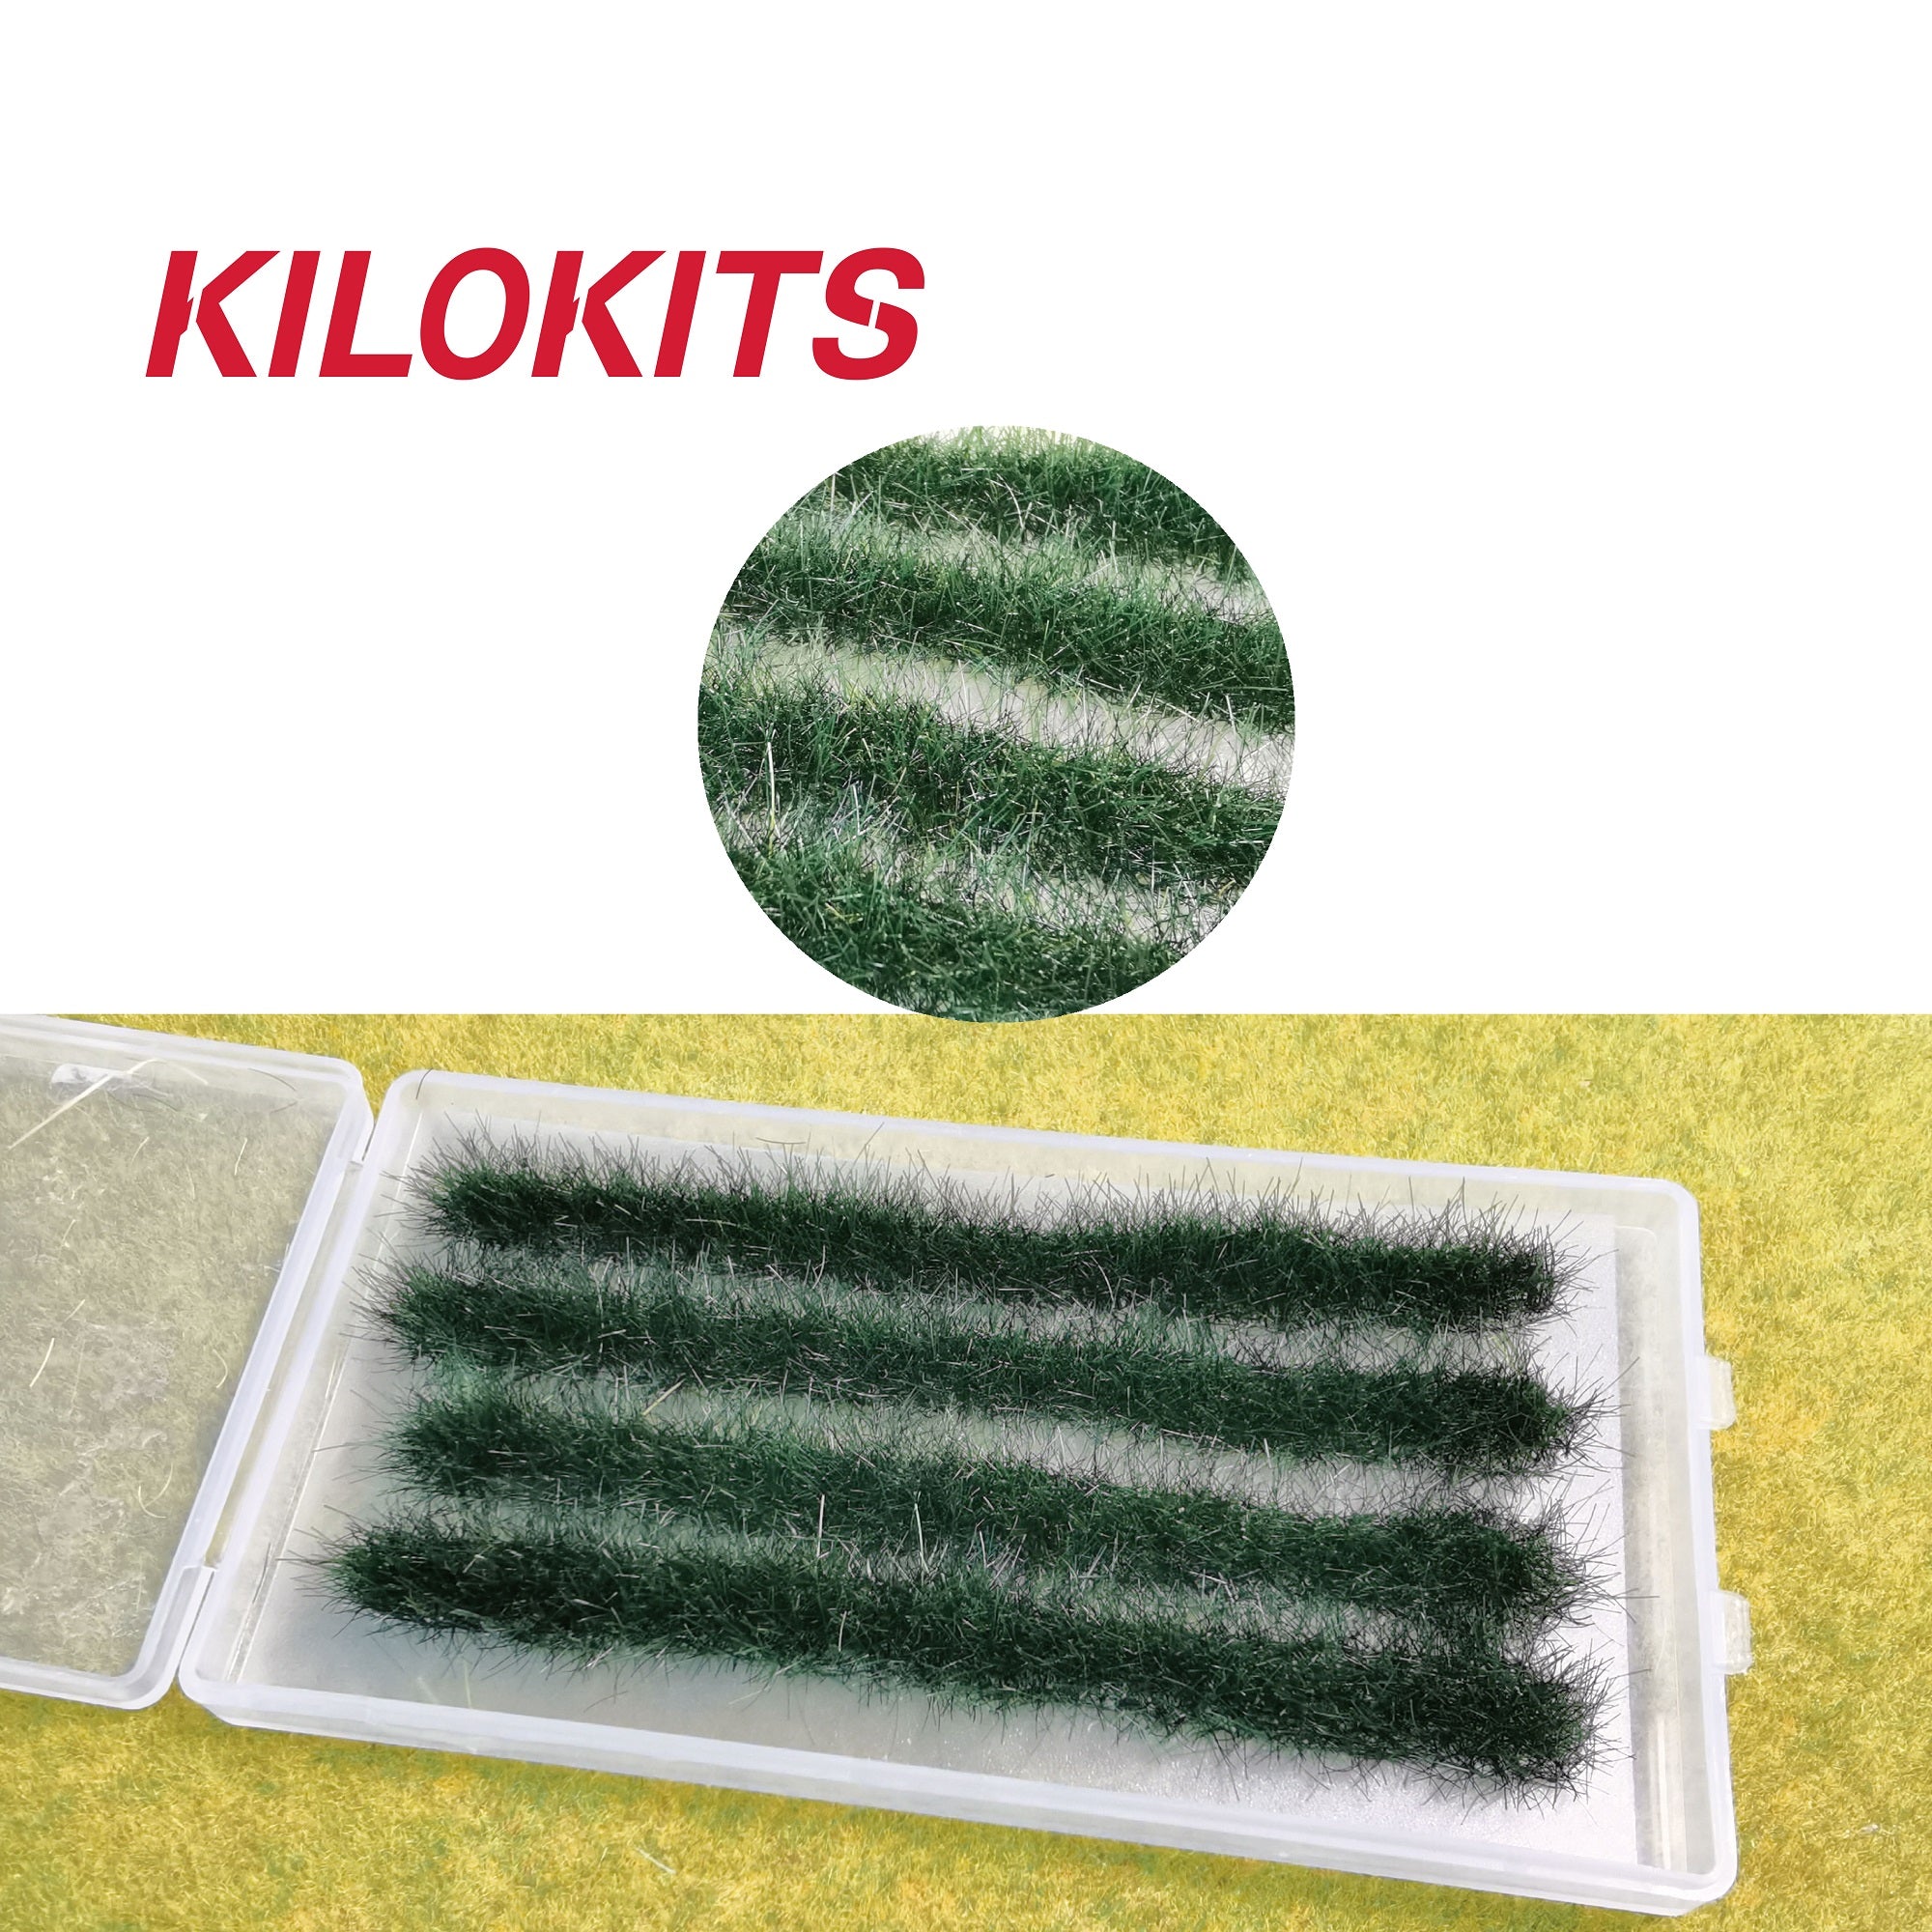 5-8MM Grass Stripes for Modelling Multi Colors Optional #1010